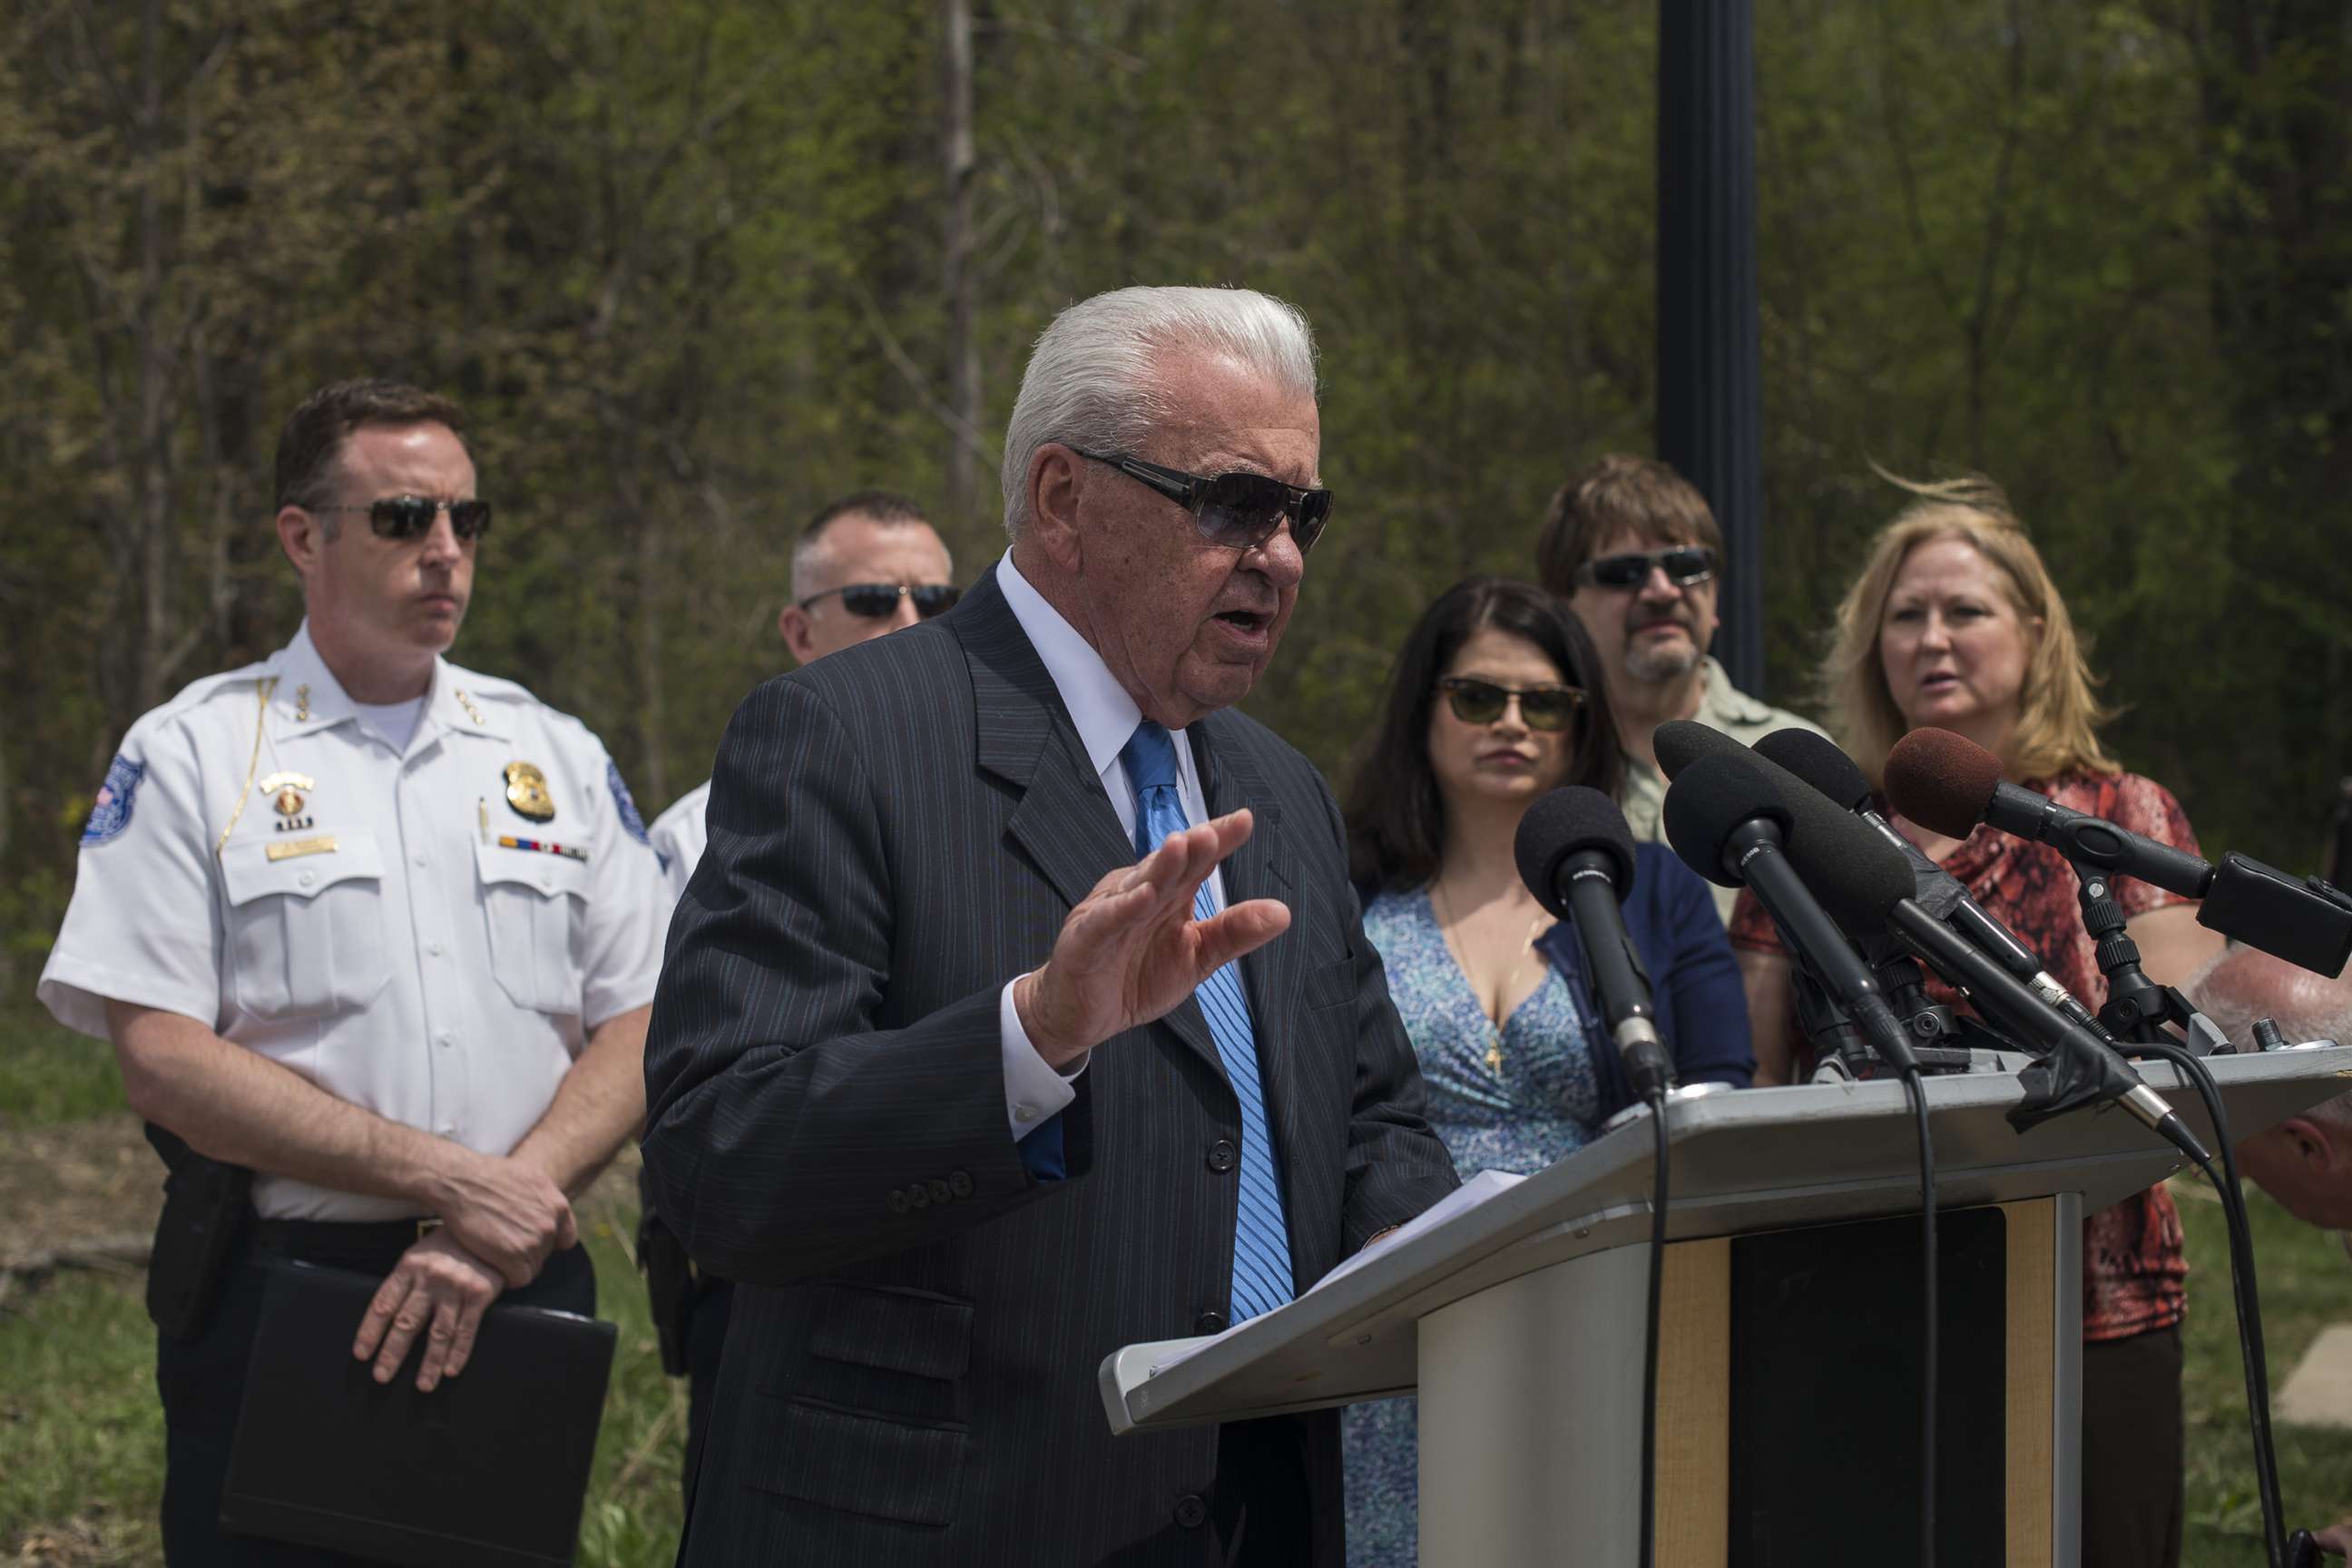 PHOTO: William Dwyer, the Commissioner of the Warren Police, discusses the progress of a reopened cold case during a press conference on May 9, 2018 in Macomb, Mich.